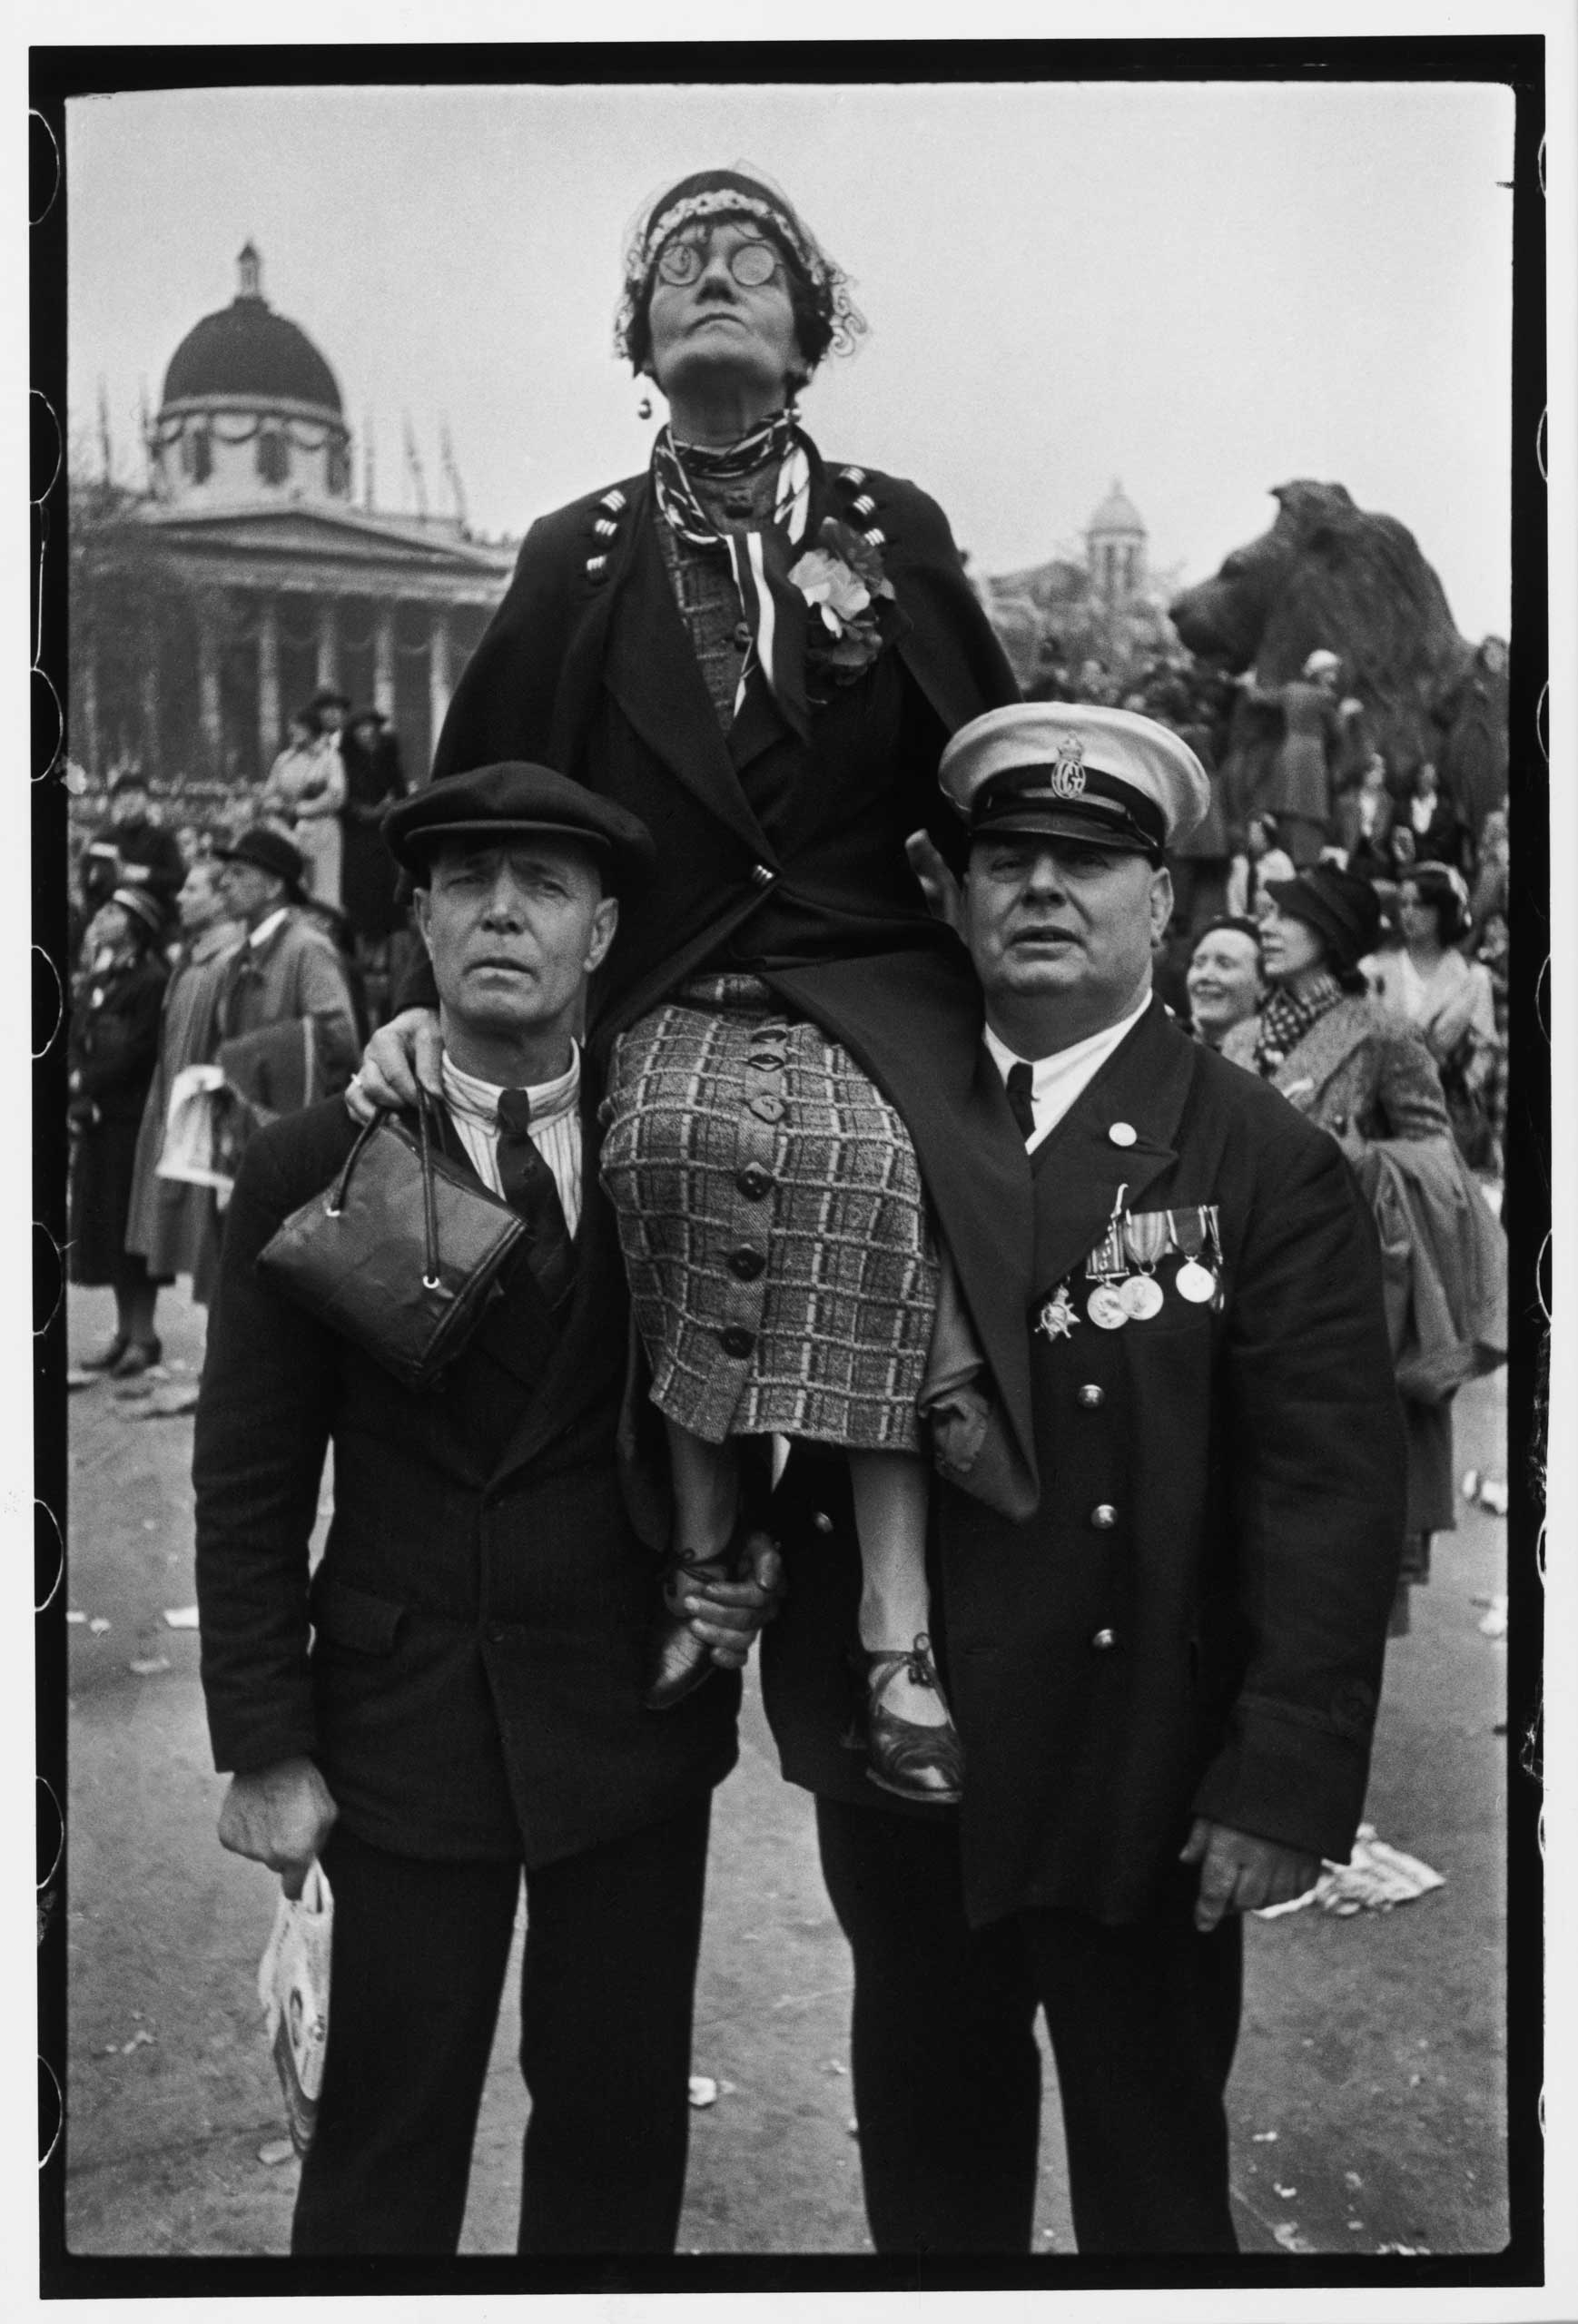 GREAT BRITAIN. England. London. 12 May 1937.Waiting in Trafalgar Square for the coronation parade of King George VI.